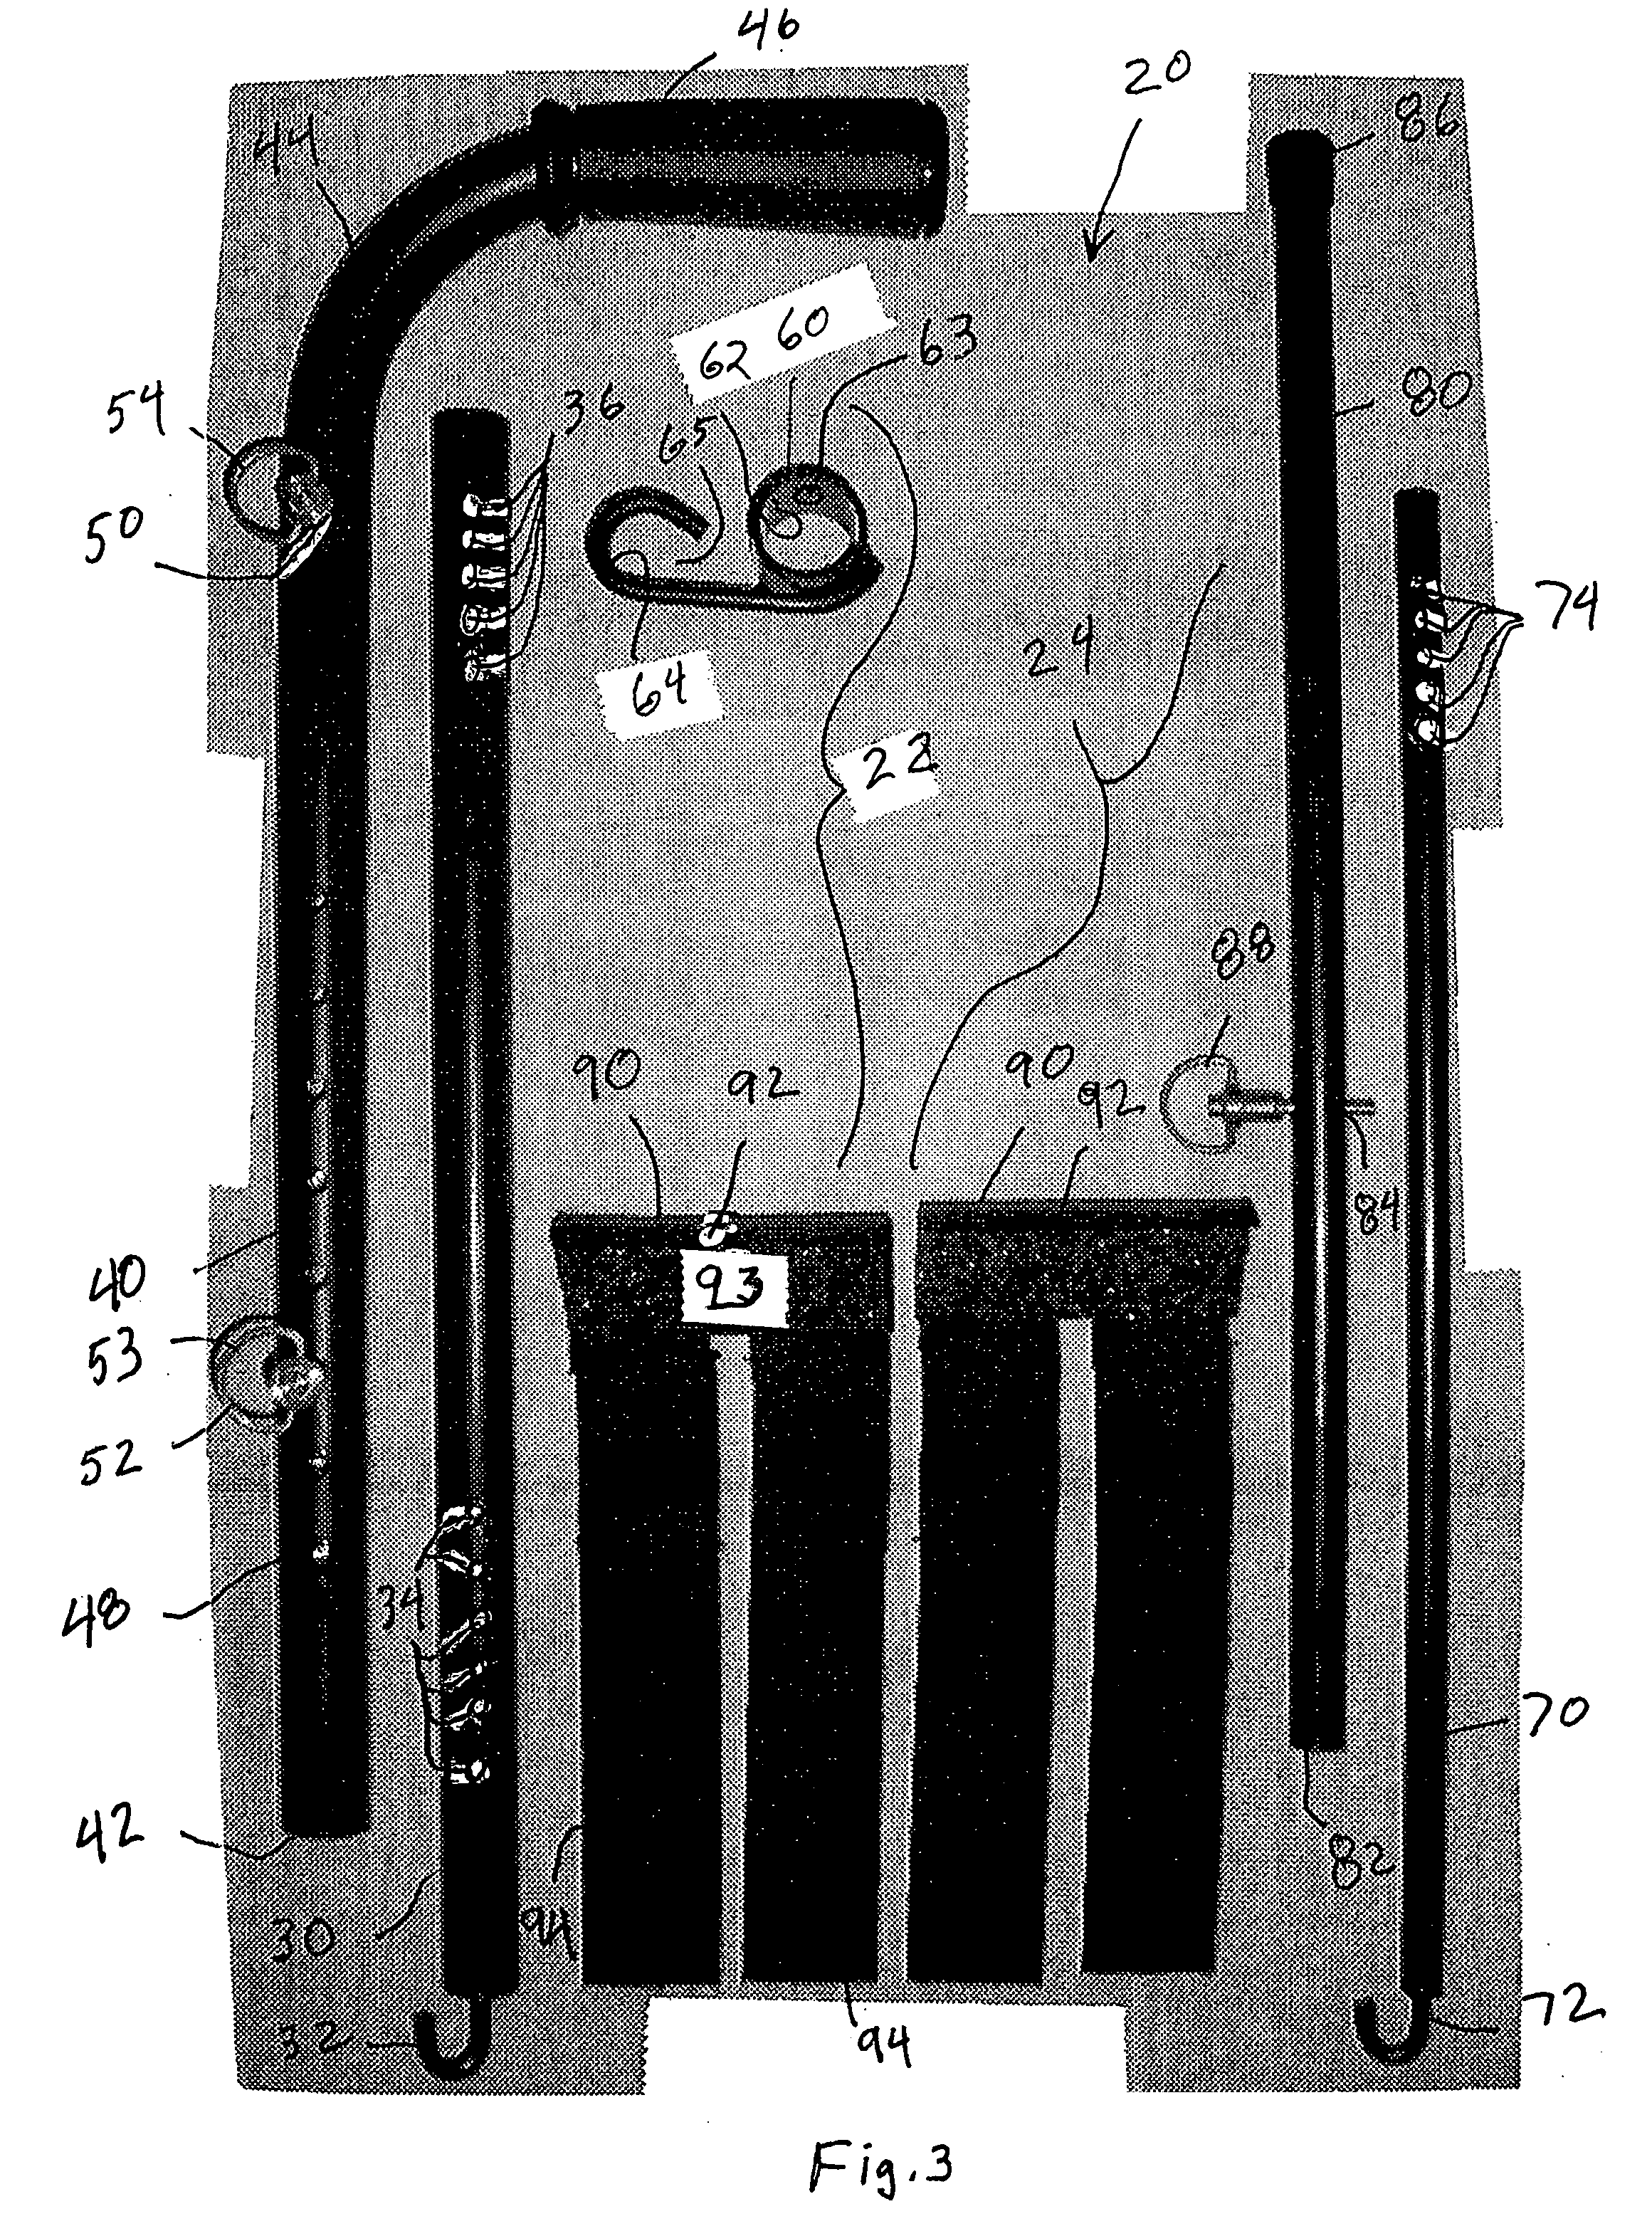 Portable hand control system for a vehicle